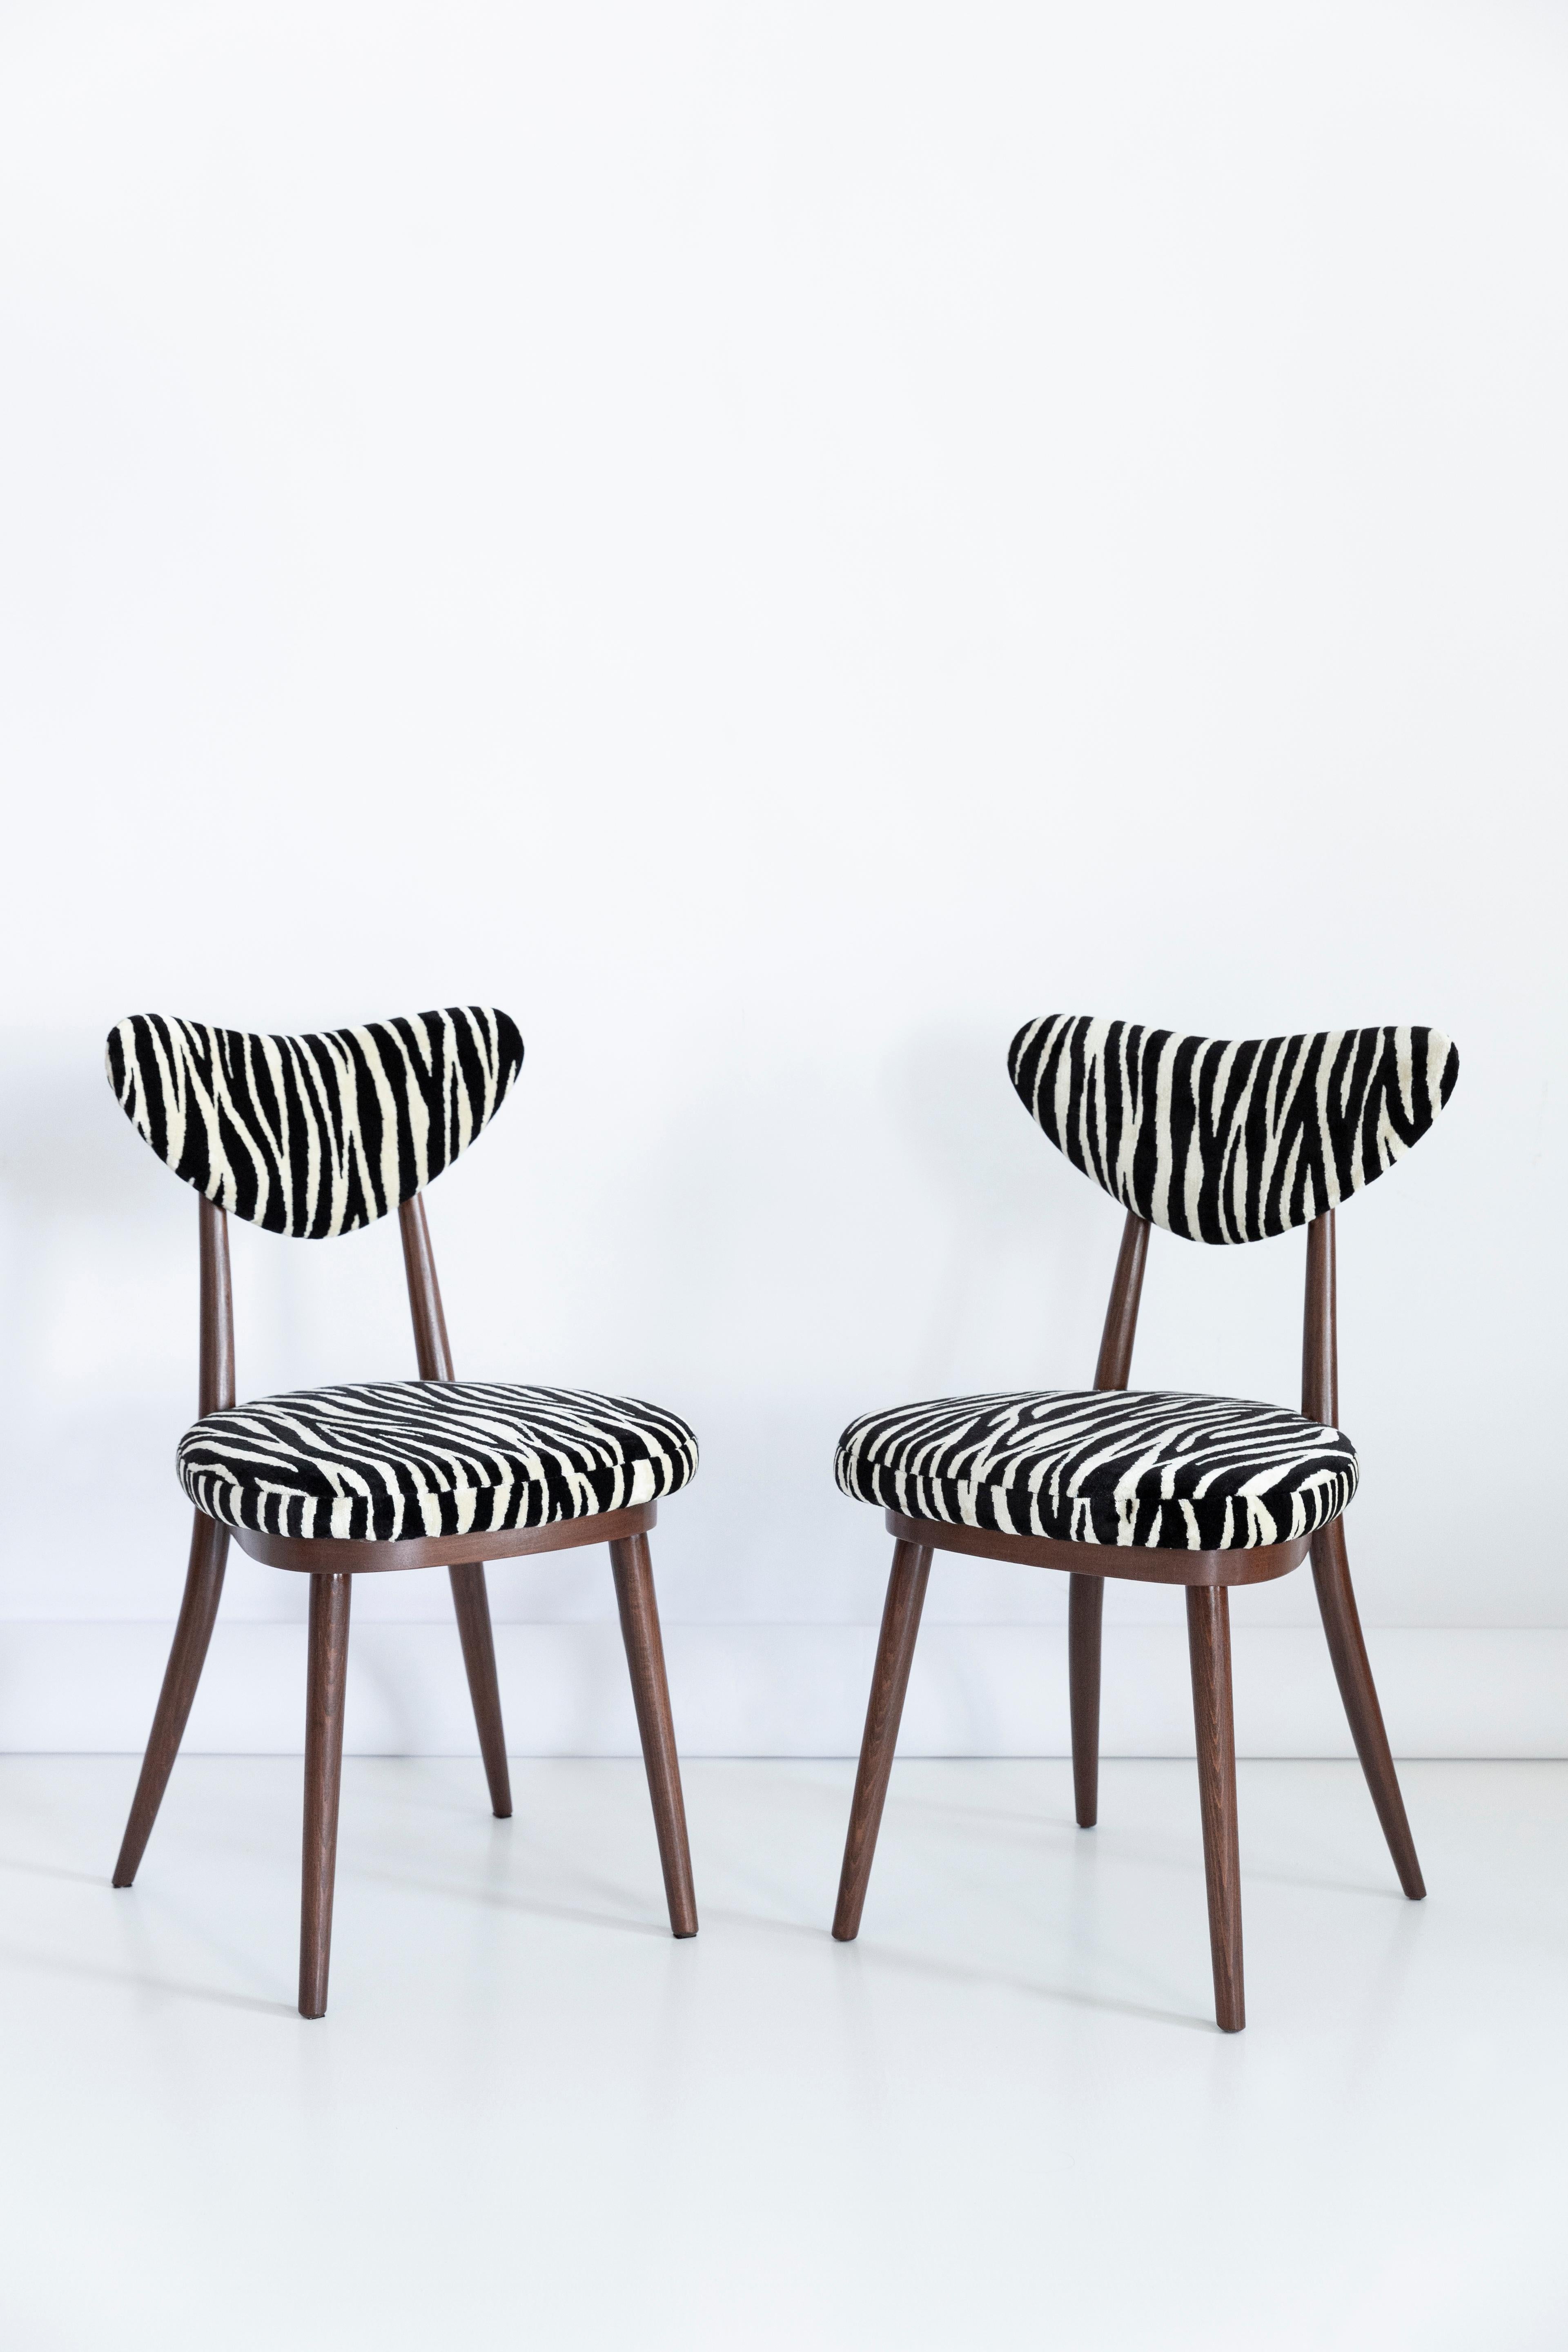 Set of Six Midcentury Zebra Black and White Heart Chairs, Poland, 1960s In Excellent Condition For Sale In 05-080 Hornowek, PL